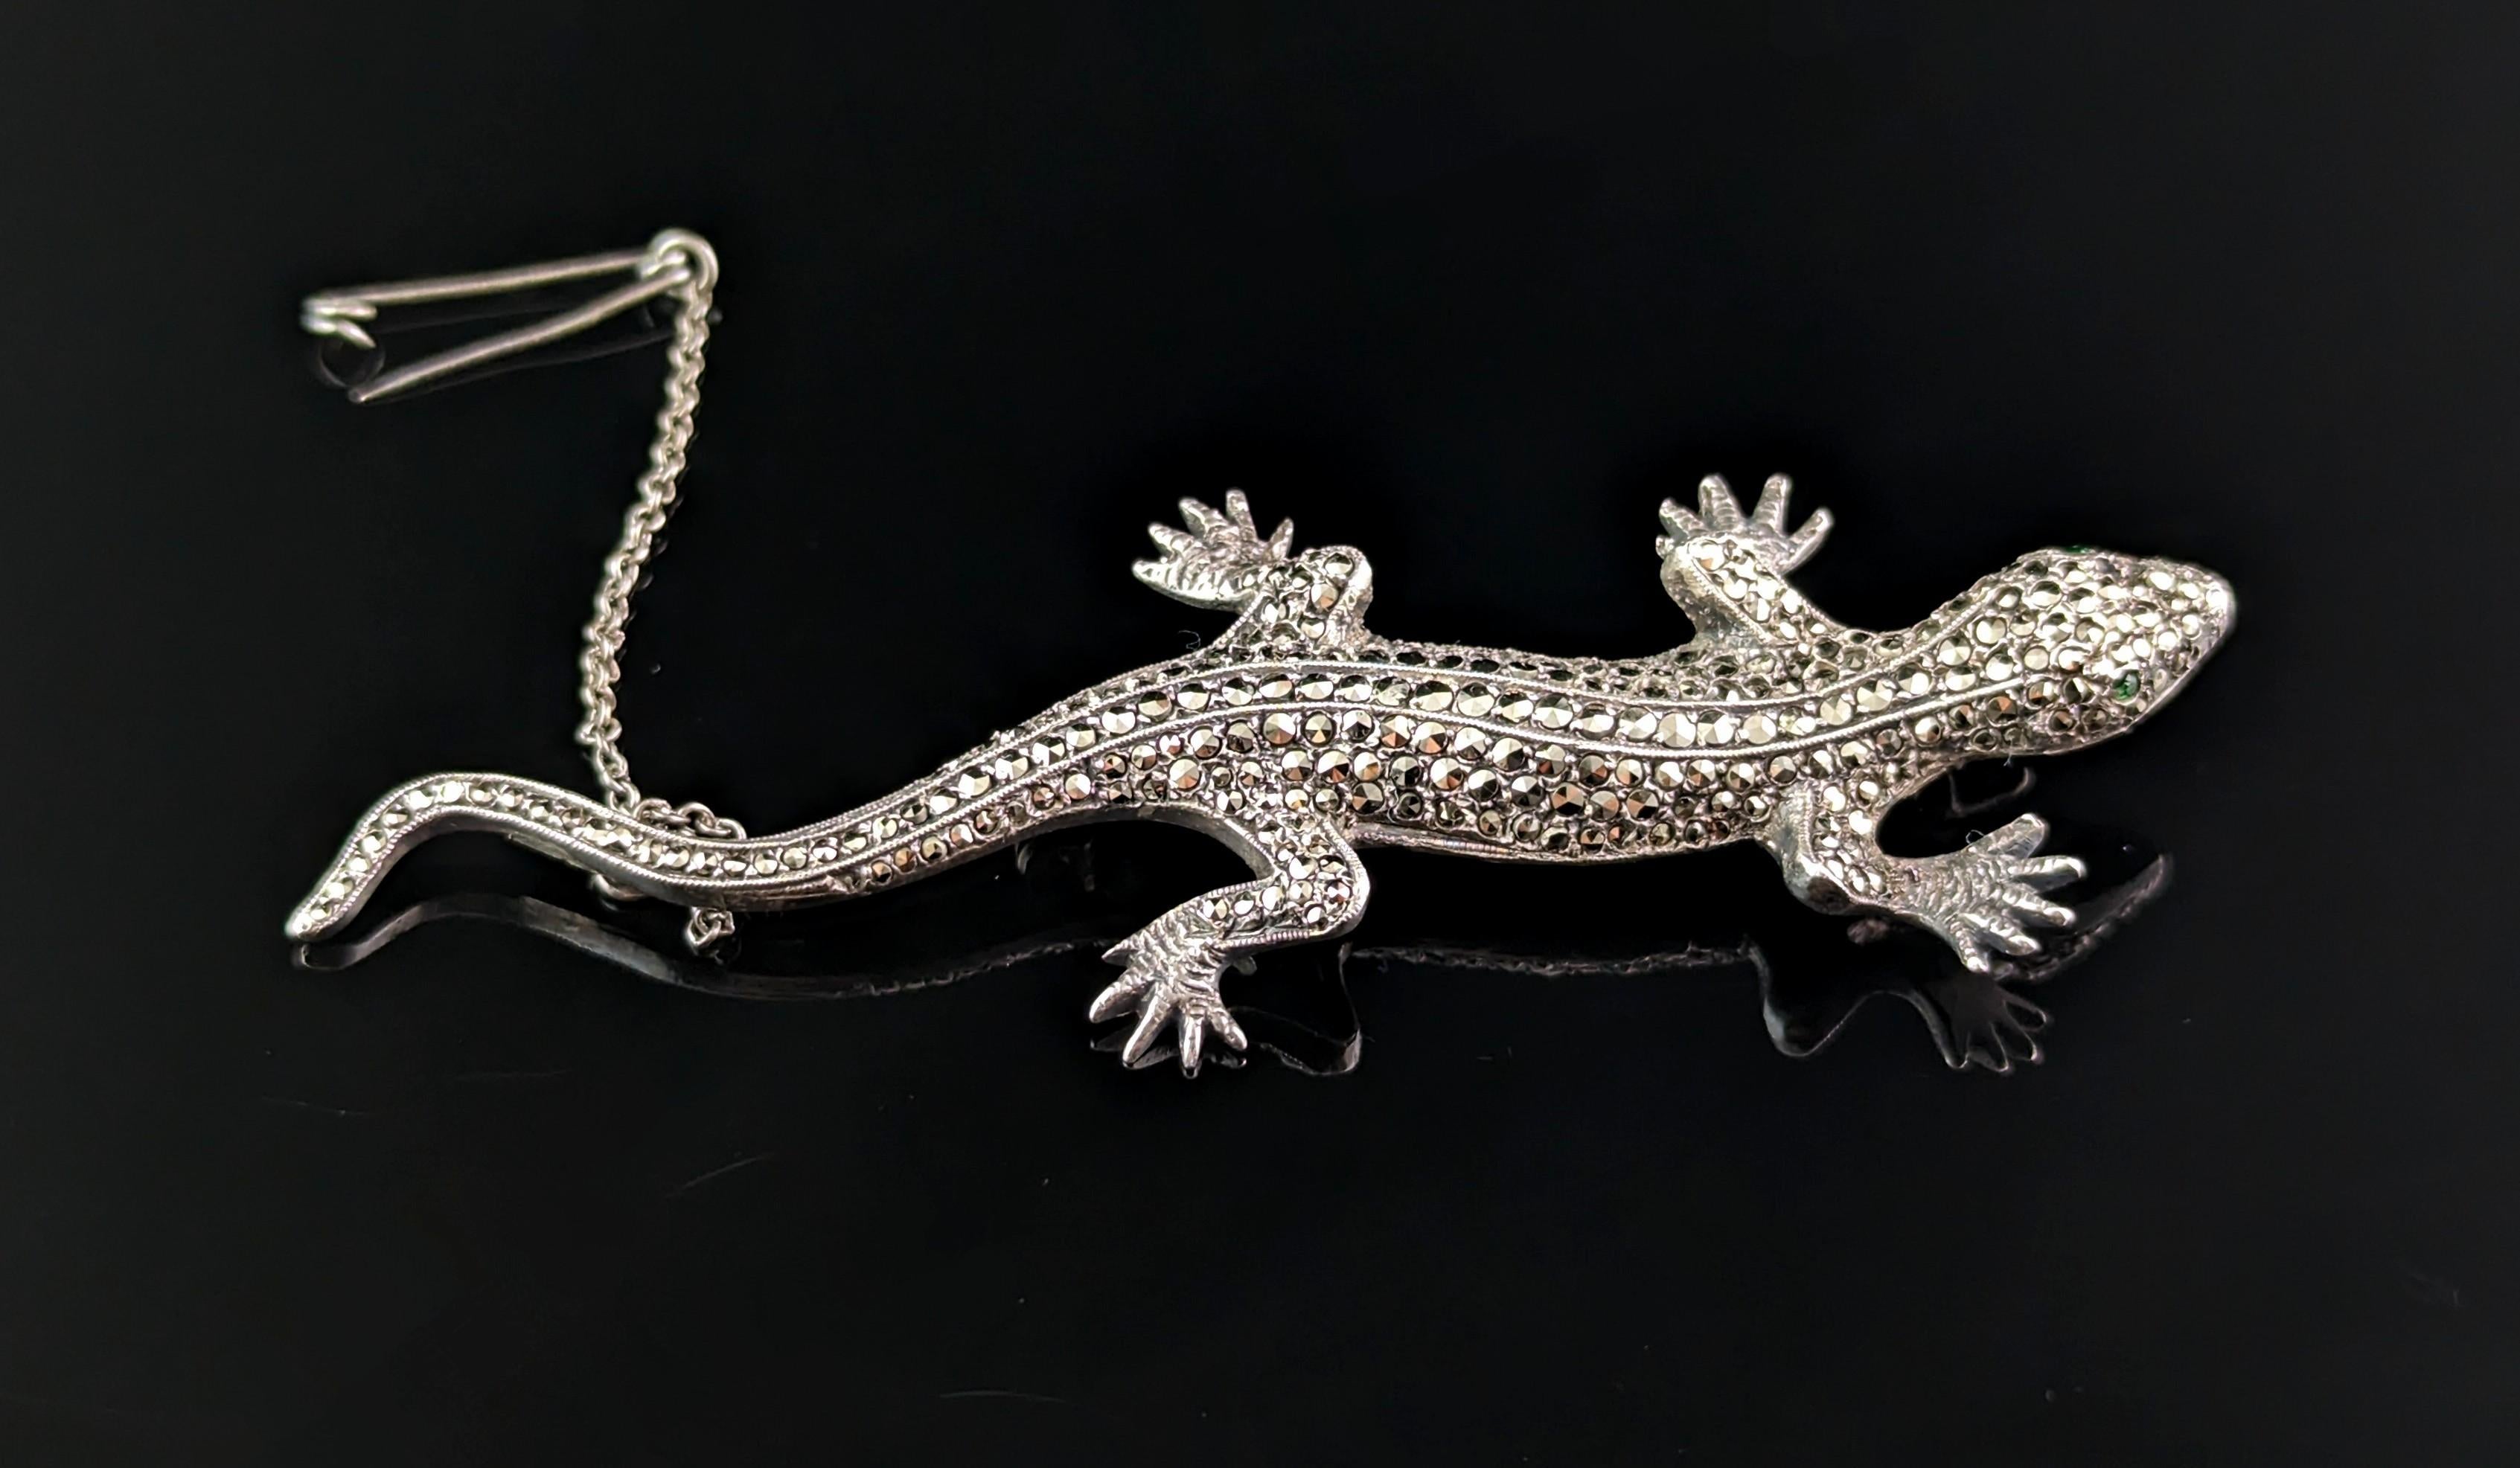 A charming Art Deco era c1930s silver and marcasite lizard brooch.

This is a large brooch well modelled as a lizard in 800 silver, adorned with marcasite and he has the sweetest little emerald green paste eyes.

Such a gorgeous vintage brooch, very